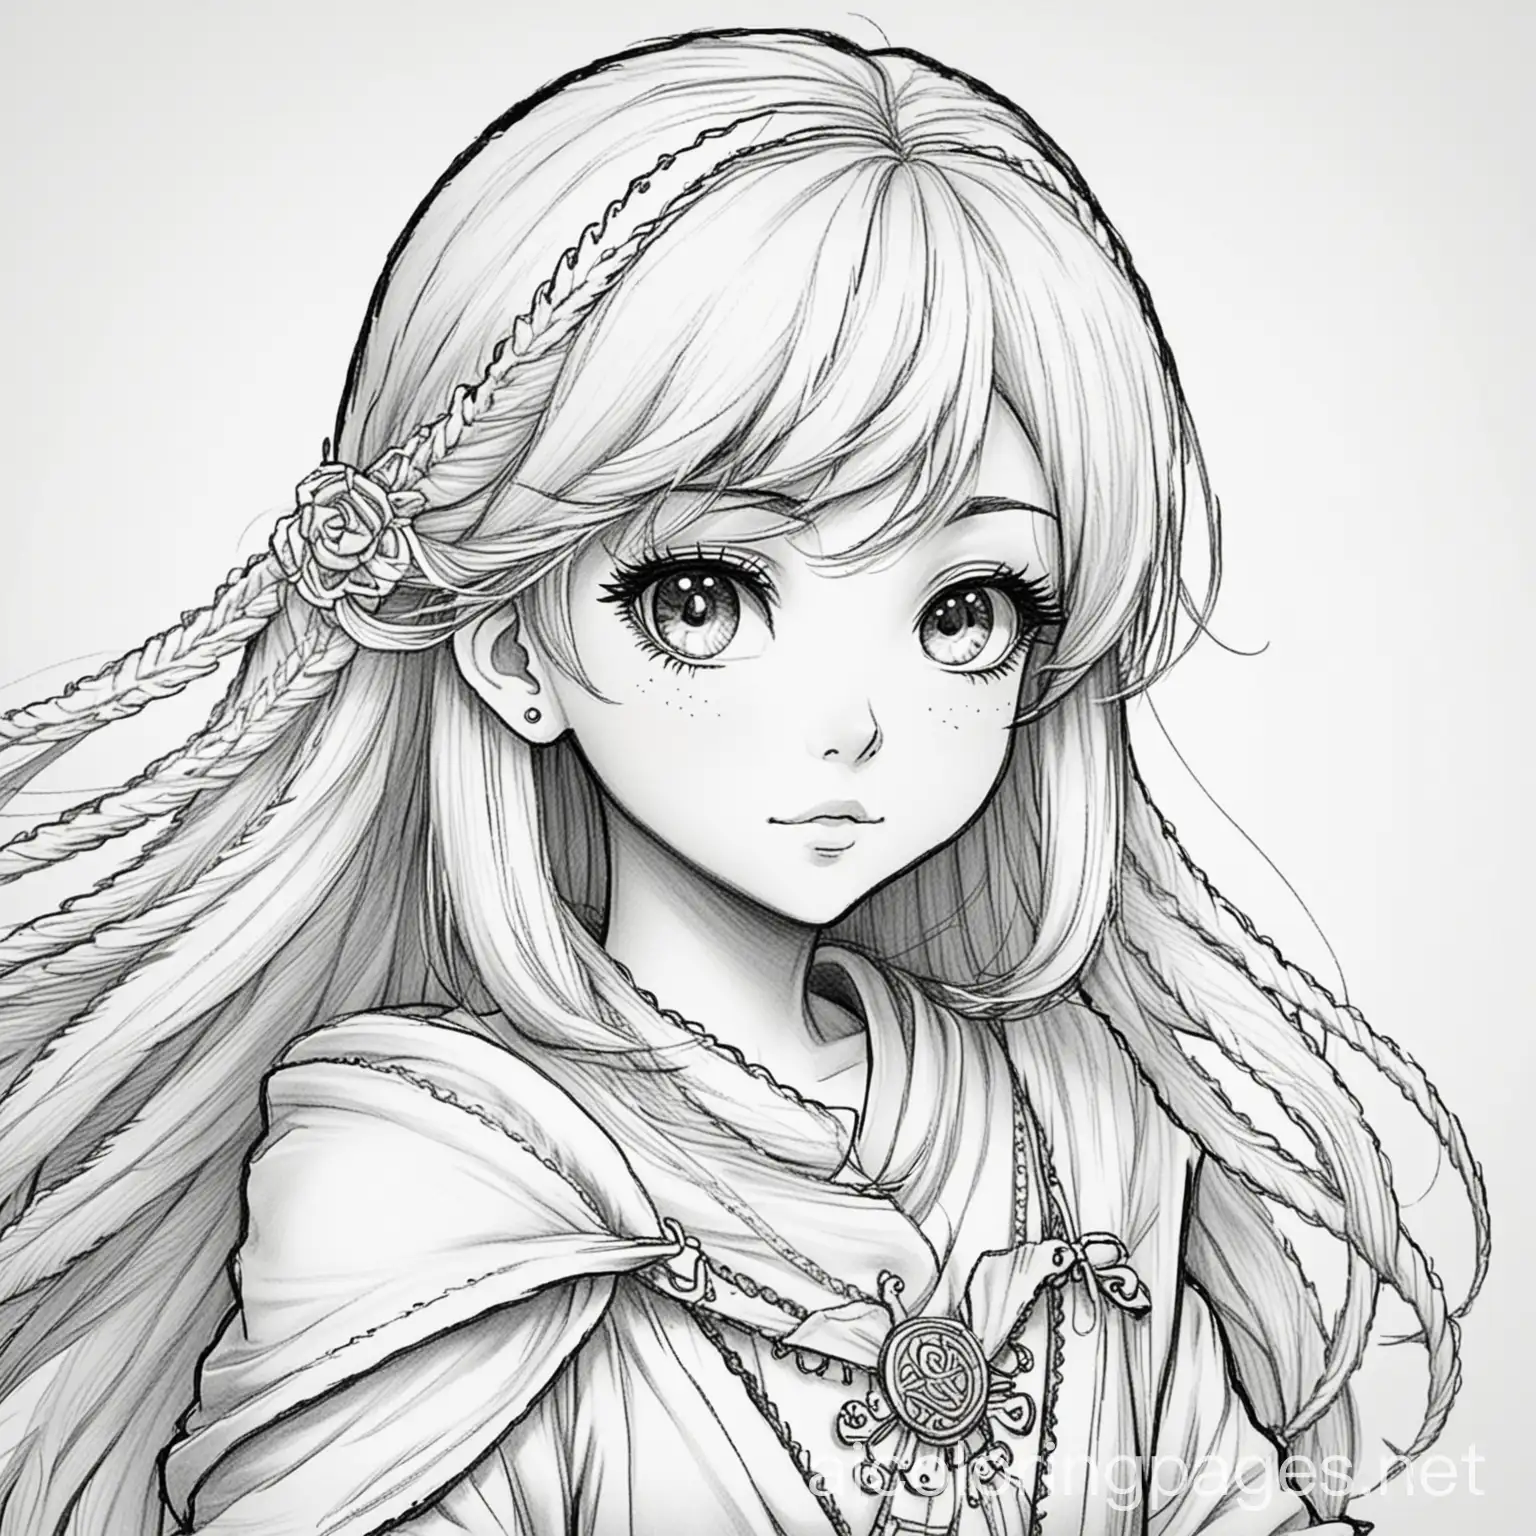 manga fantasy, Coloring Page, black and white, line art, white background, Simplicity, Ample White Space. The background of the coloring page is plain white to make it easy for young children to color within the lines. The outlines of all the subjects are easy to distinguish, making it simple for kids to color without too much difficulty